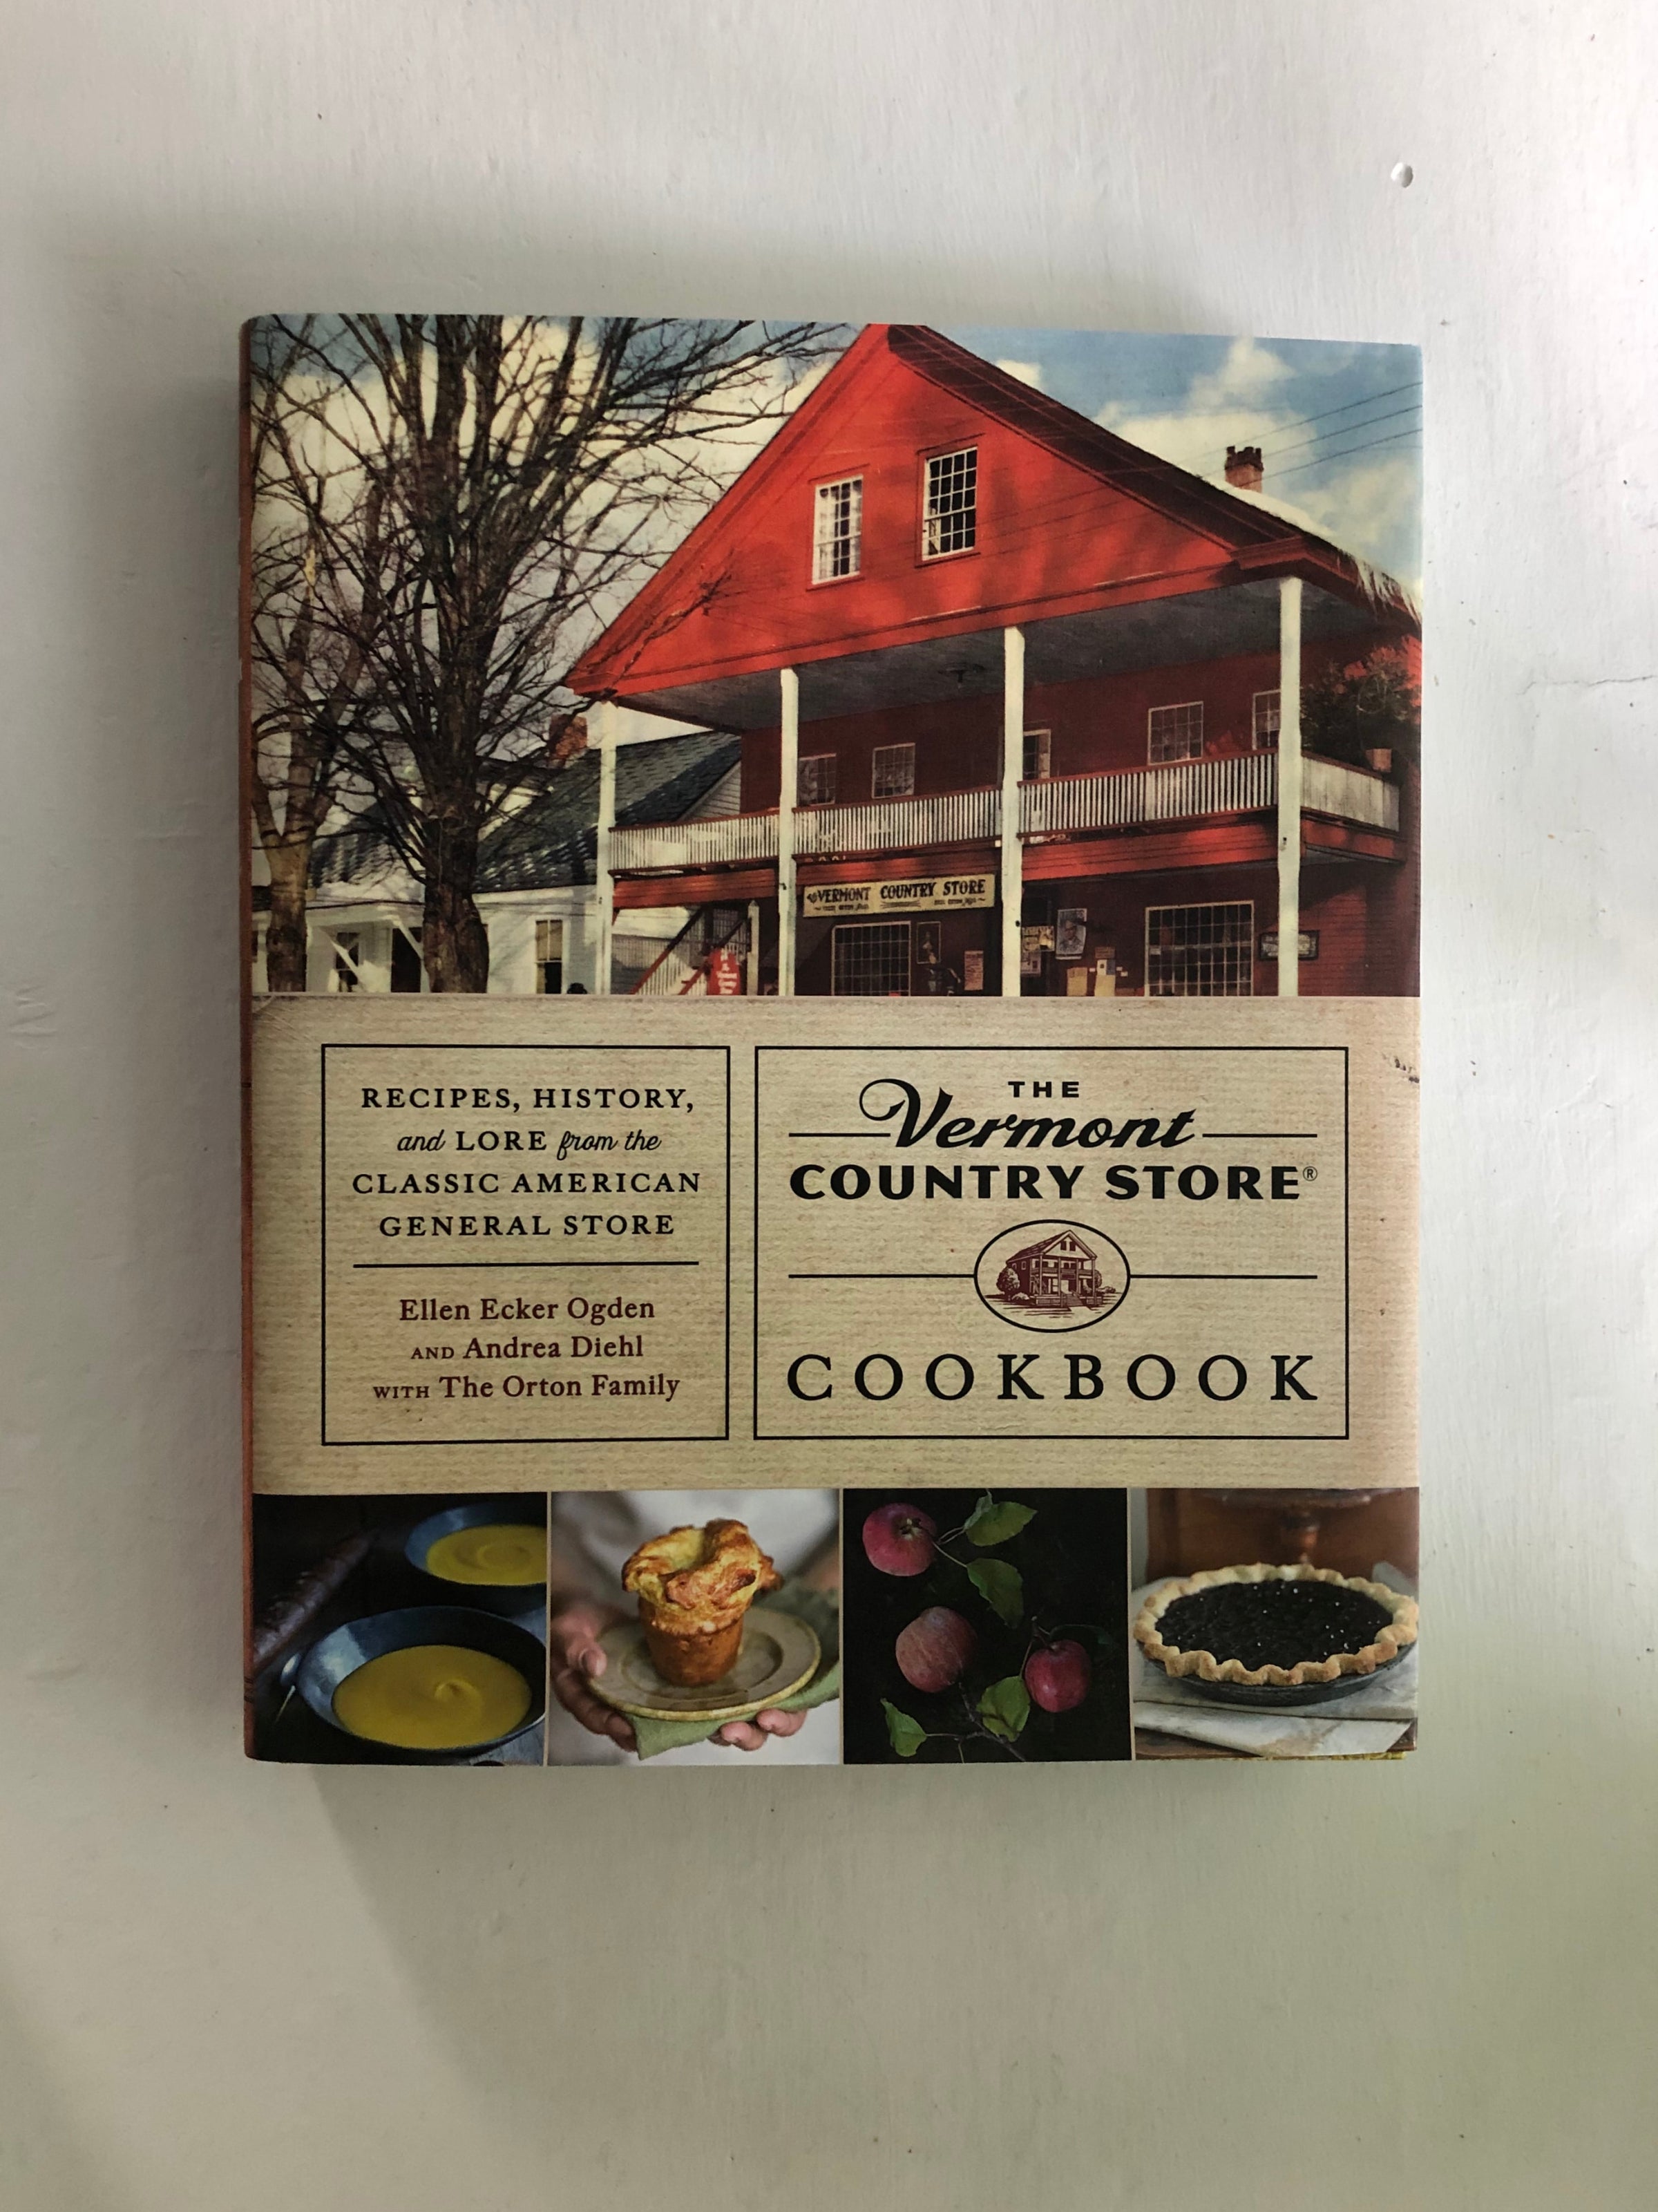 Vermont Country Store Cookbook  Robert Frost Stone House Museum